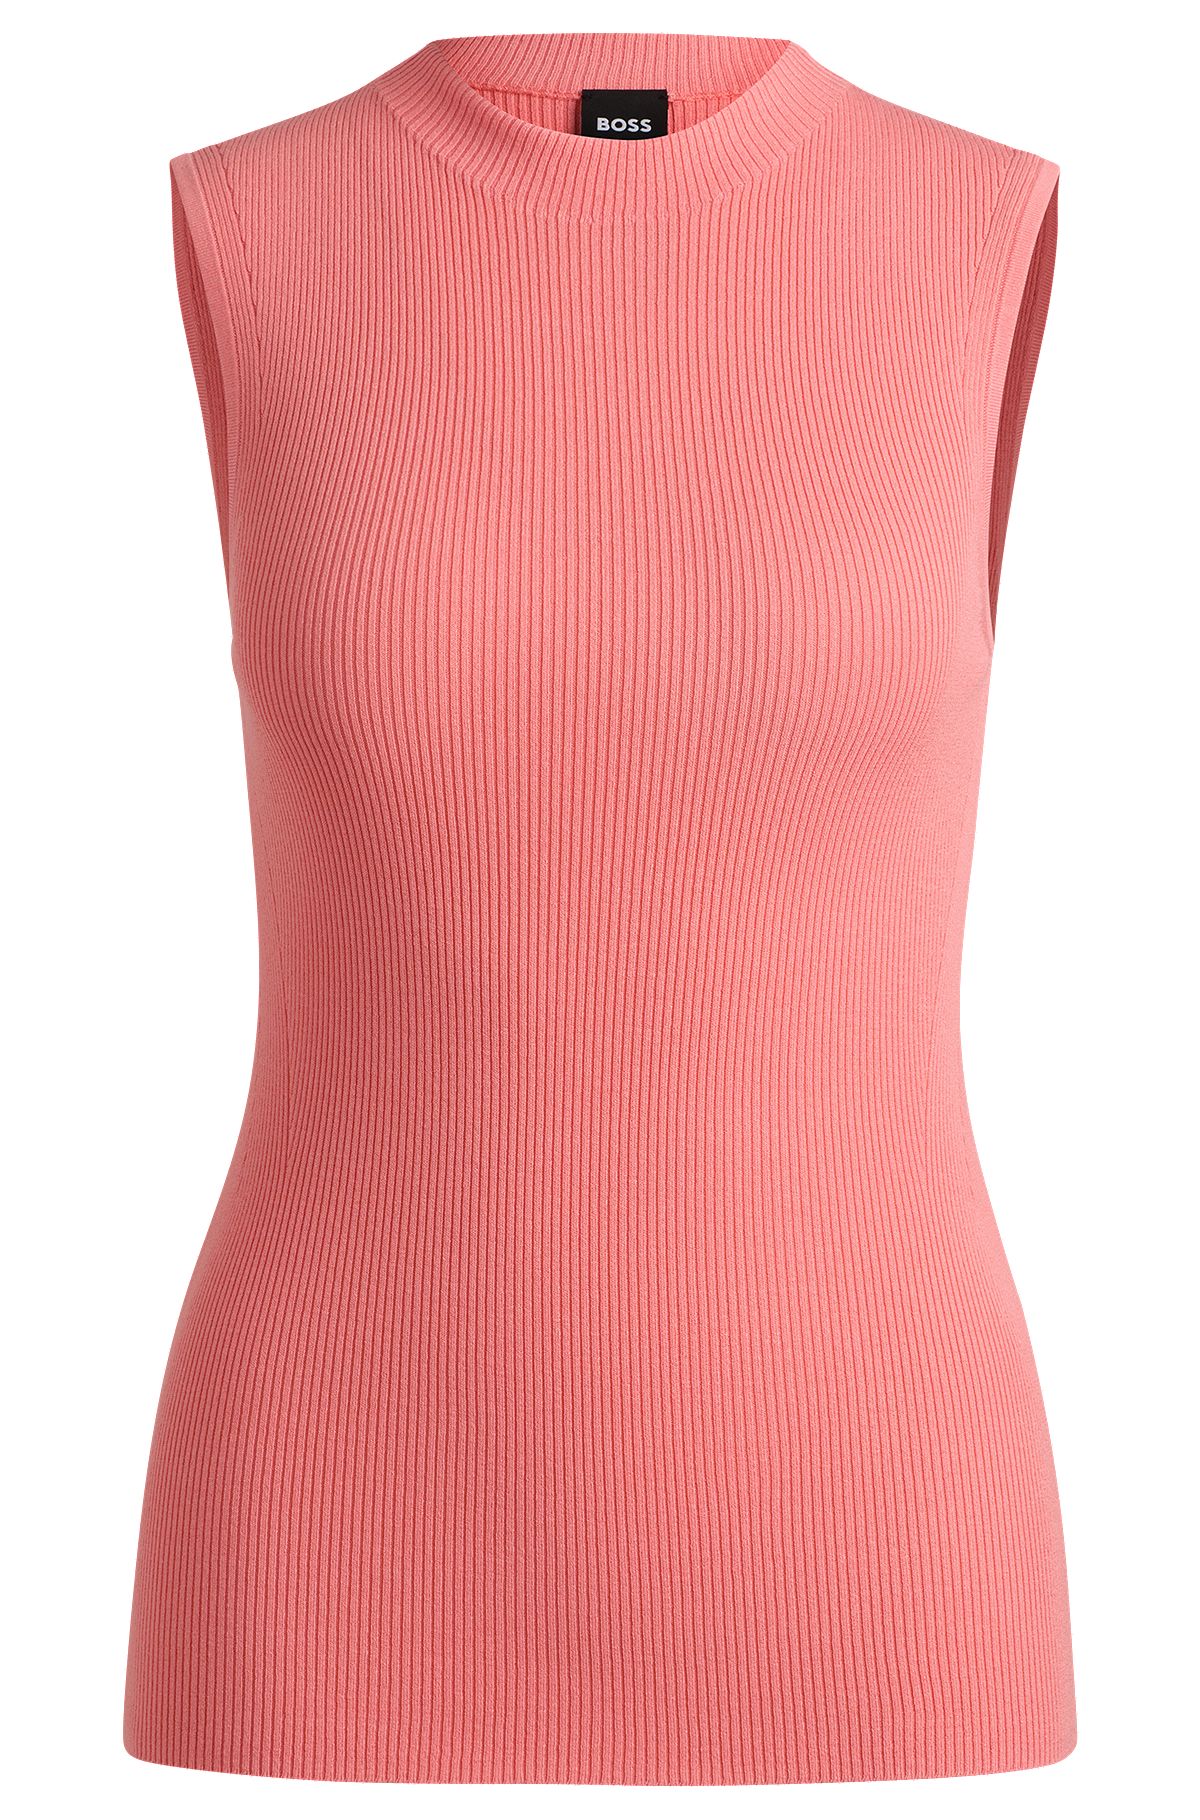 Sleeveless mock-neck top in ribbed fabric, Coral